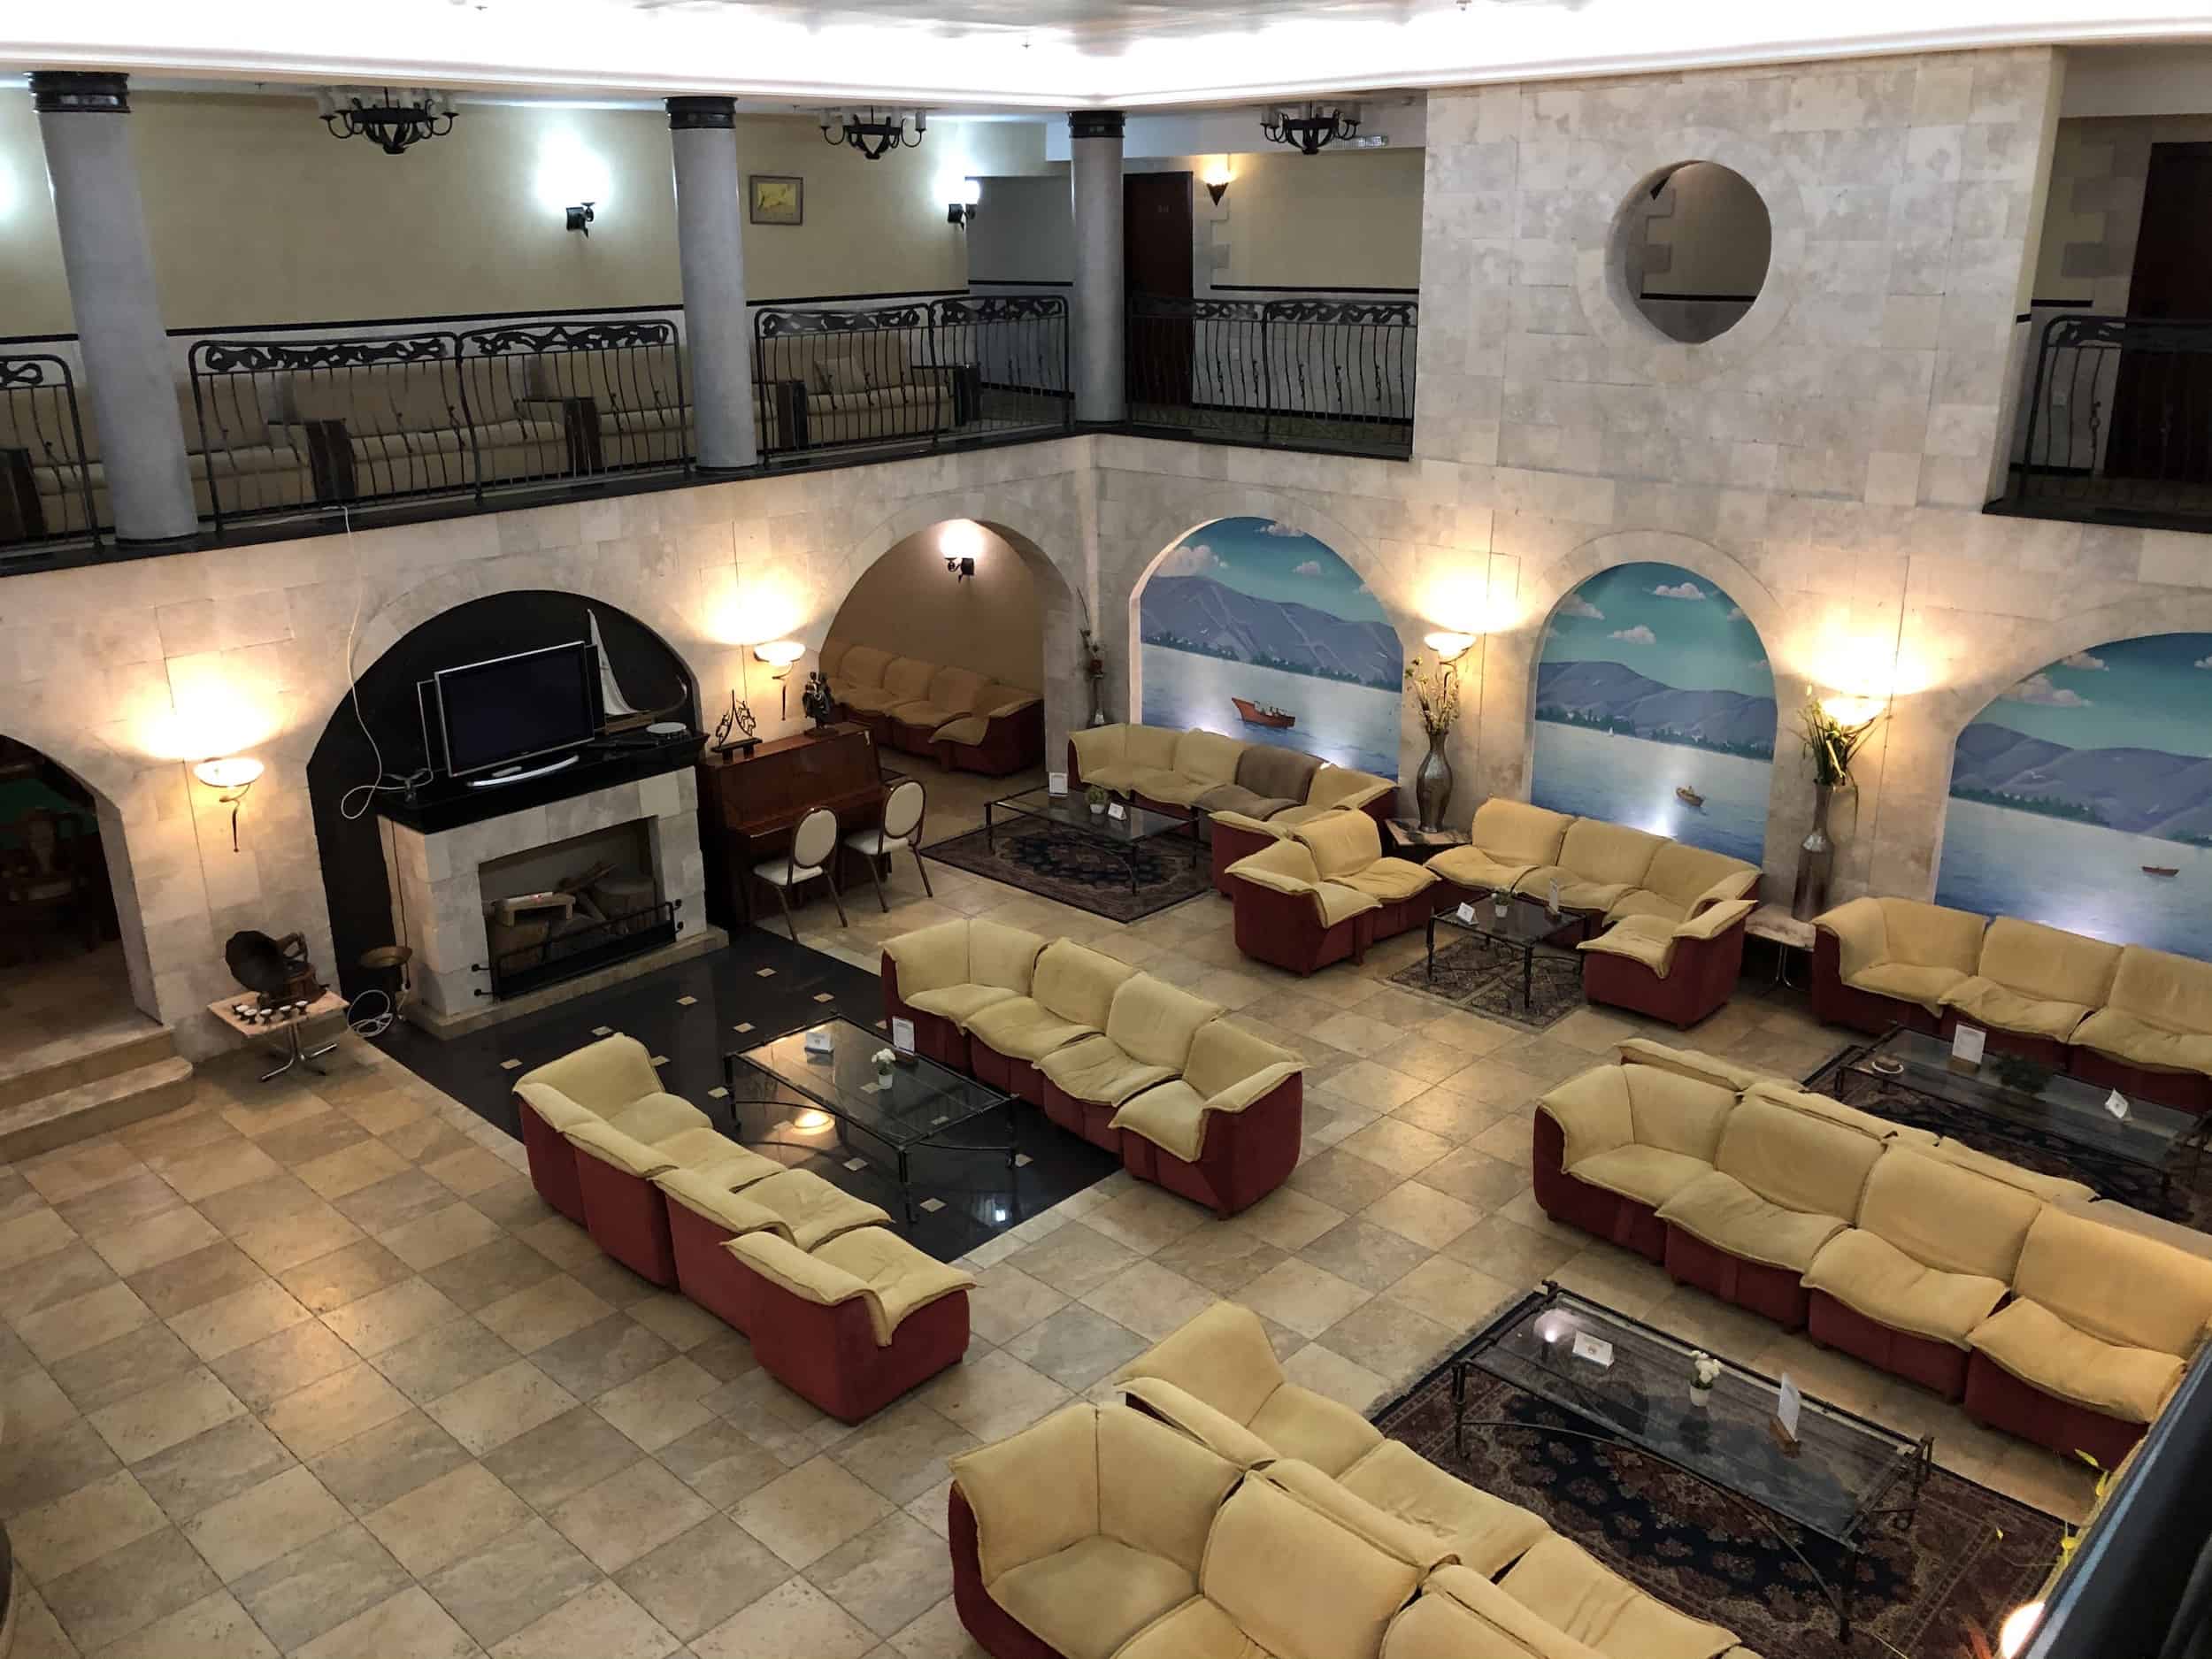 Lobby at the Ron Beach Hotel in Tiberias, Israel